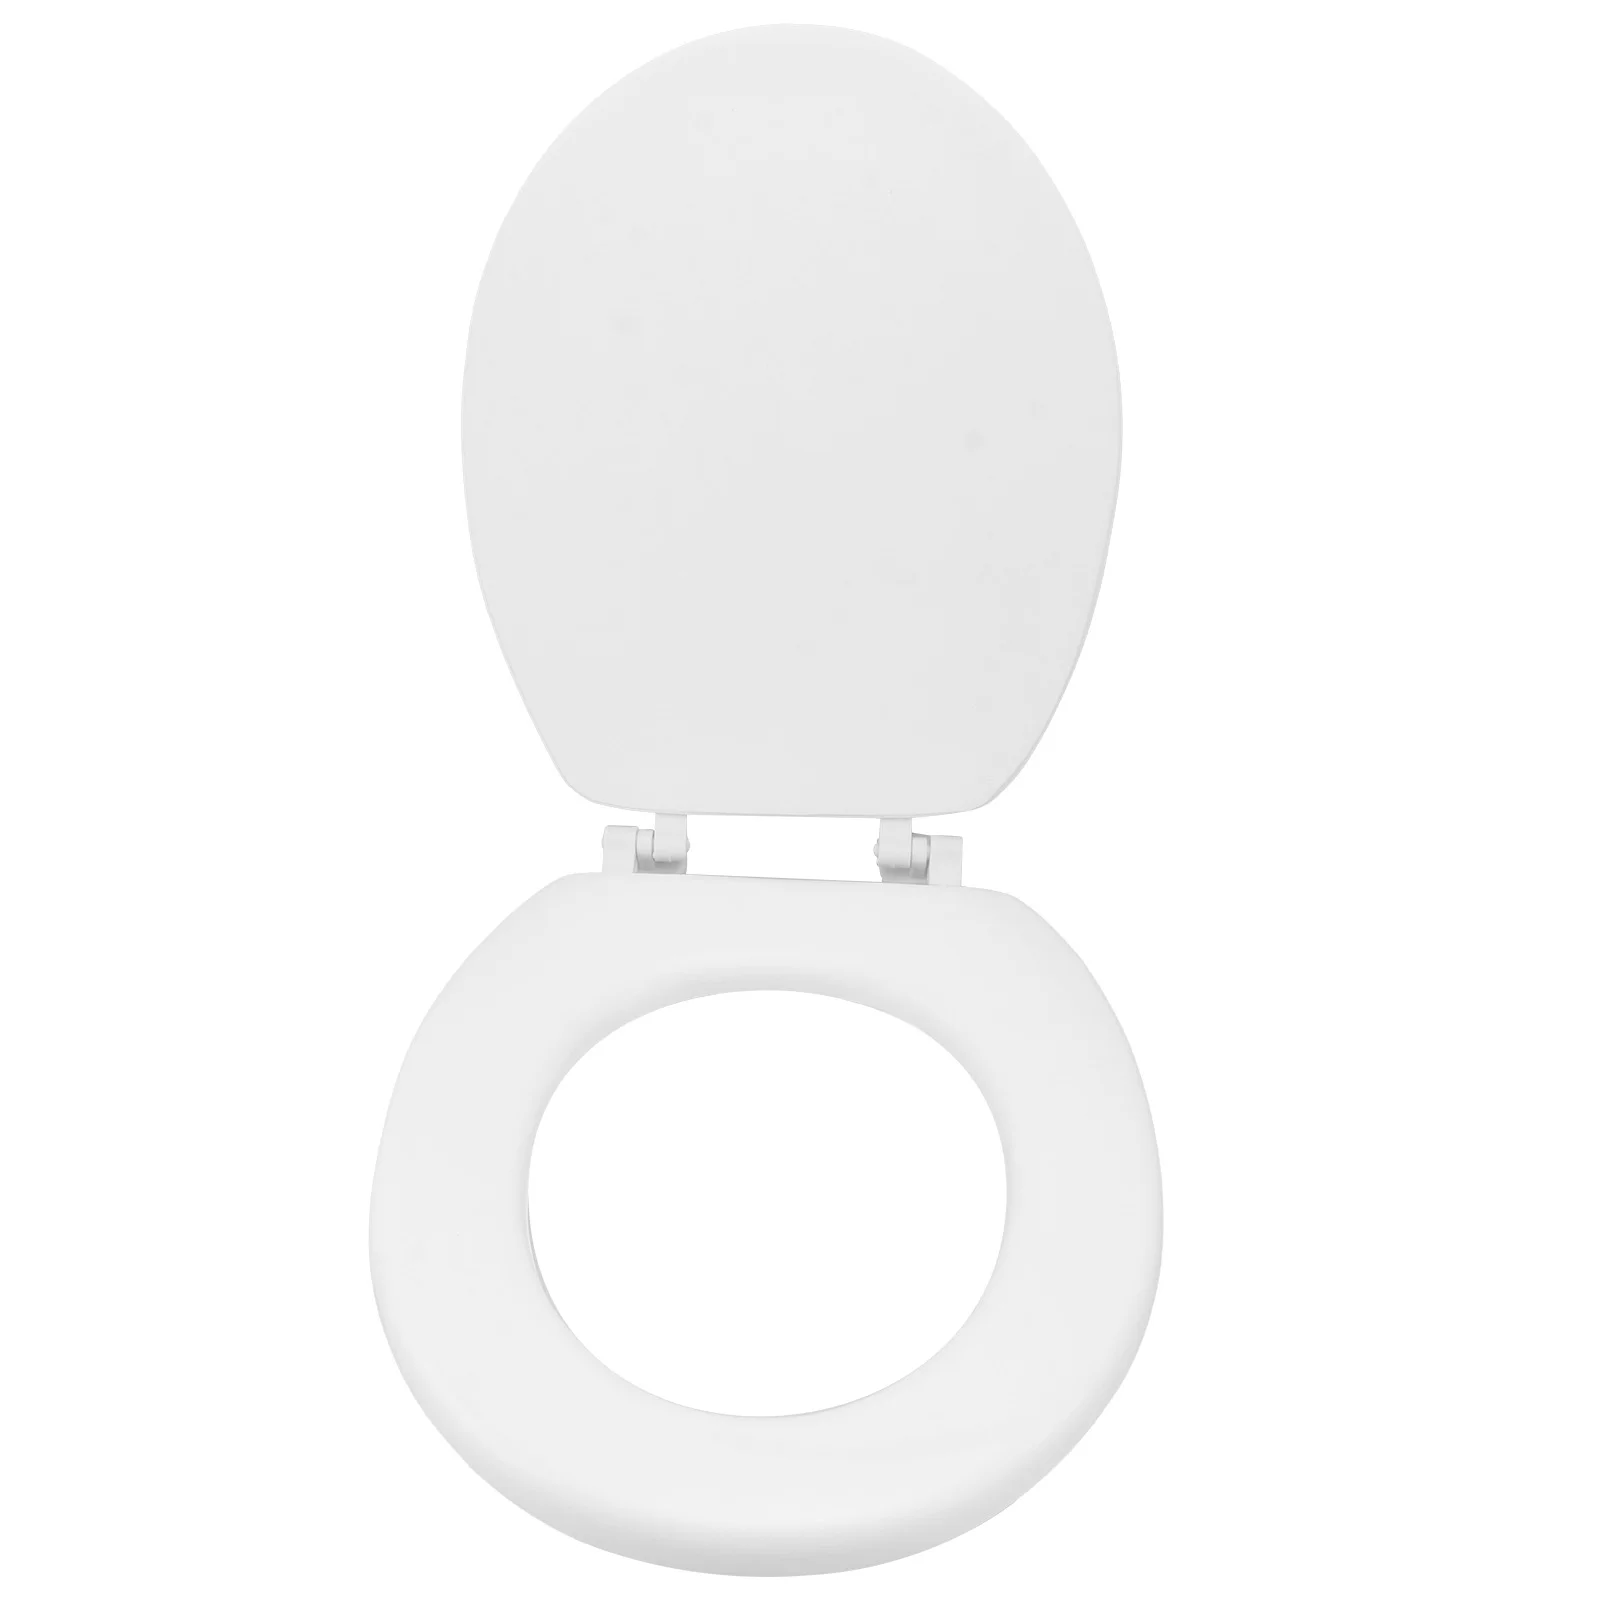 

Toilet Cover Seats Lid Toilets Elongated Close Slow Standard Oval Thicken Bathroom Seat Soft Covers Potty Set Gasket Open Front